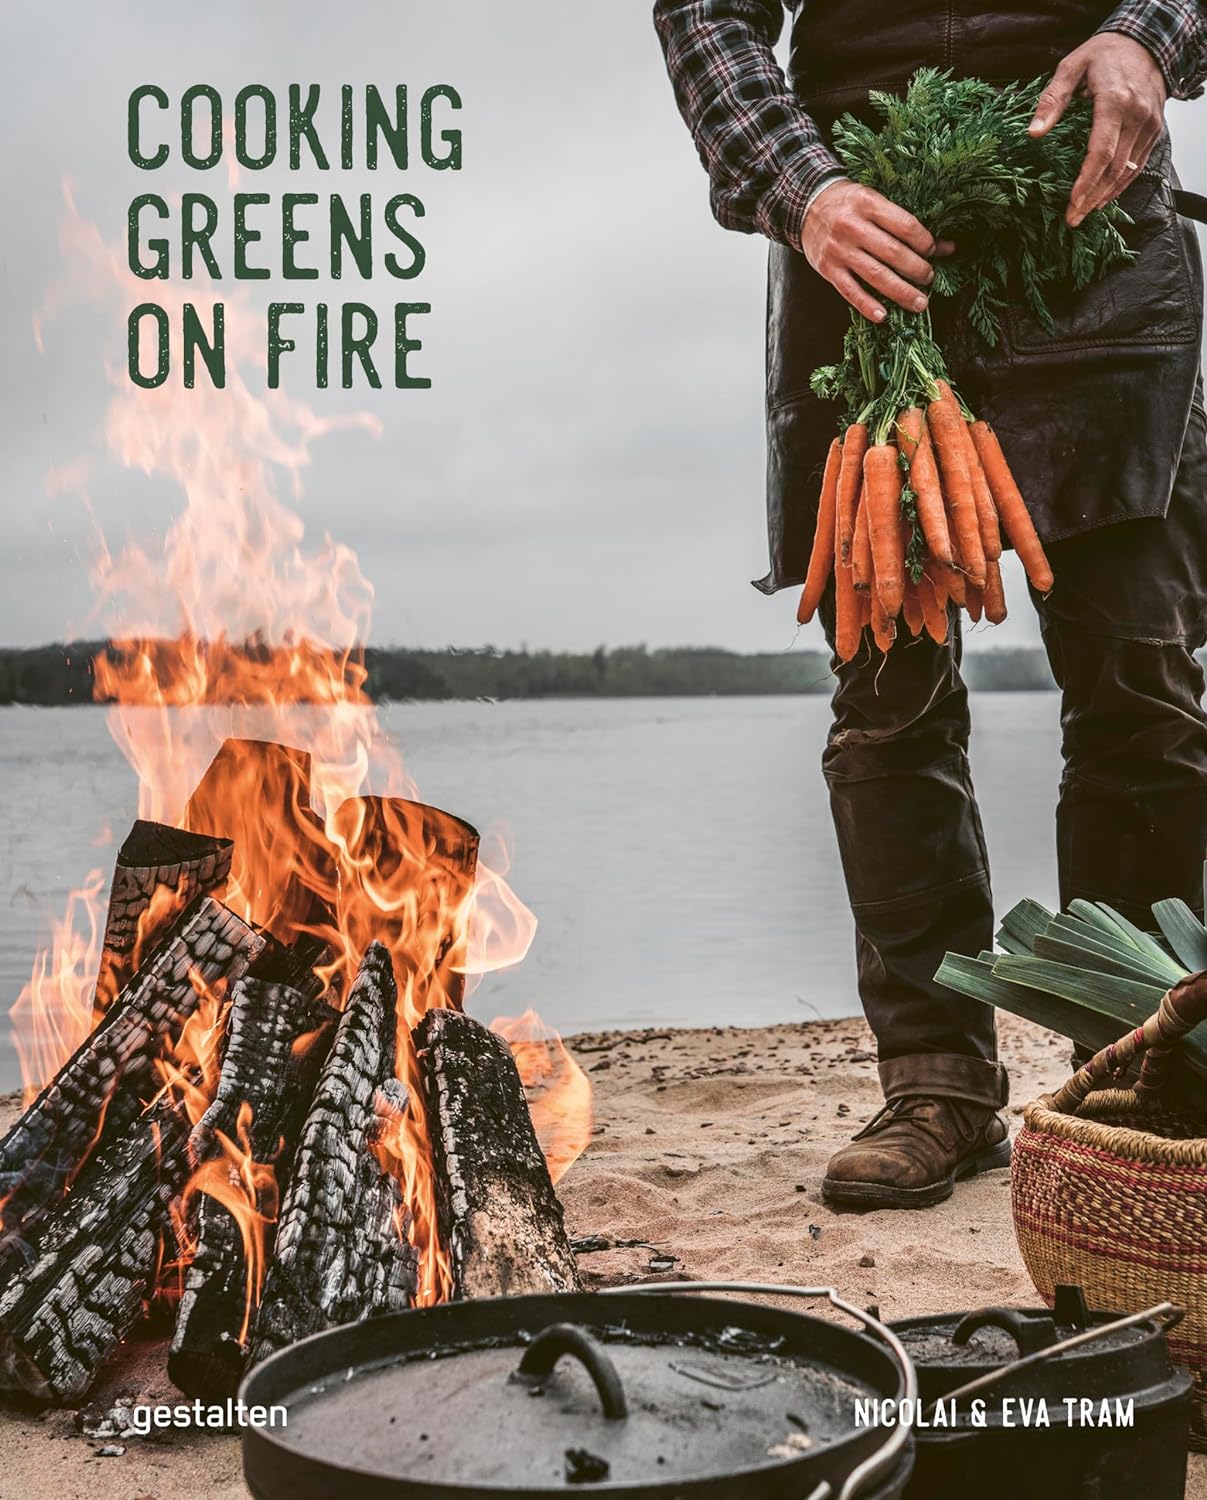 *Pre-order* Cooking Greens on Fire: Vegetarian Recipes for the Dutch Oven and Grill (Eva Helbæk Tram and Nicolai Tram)